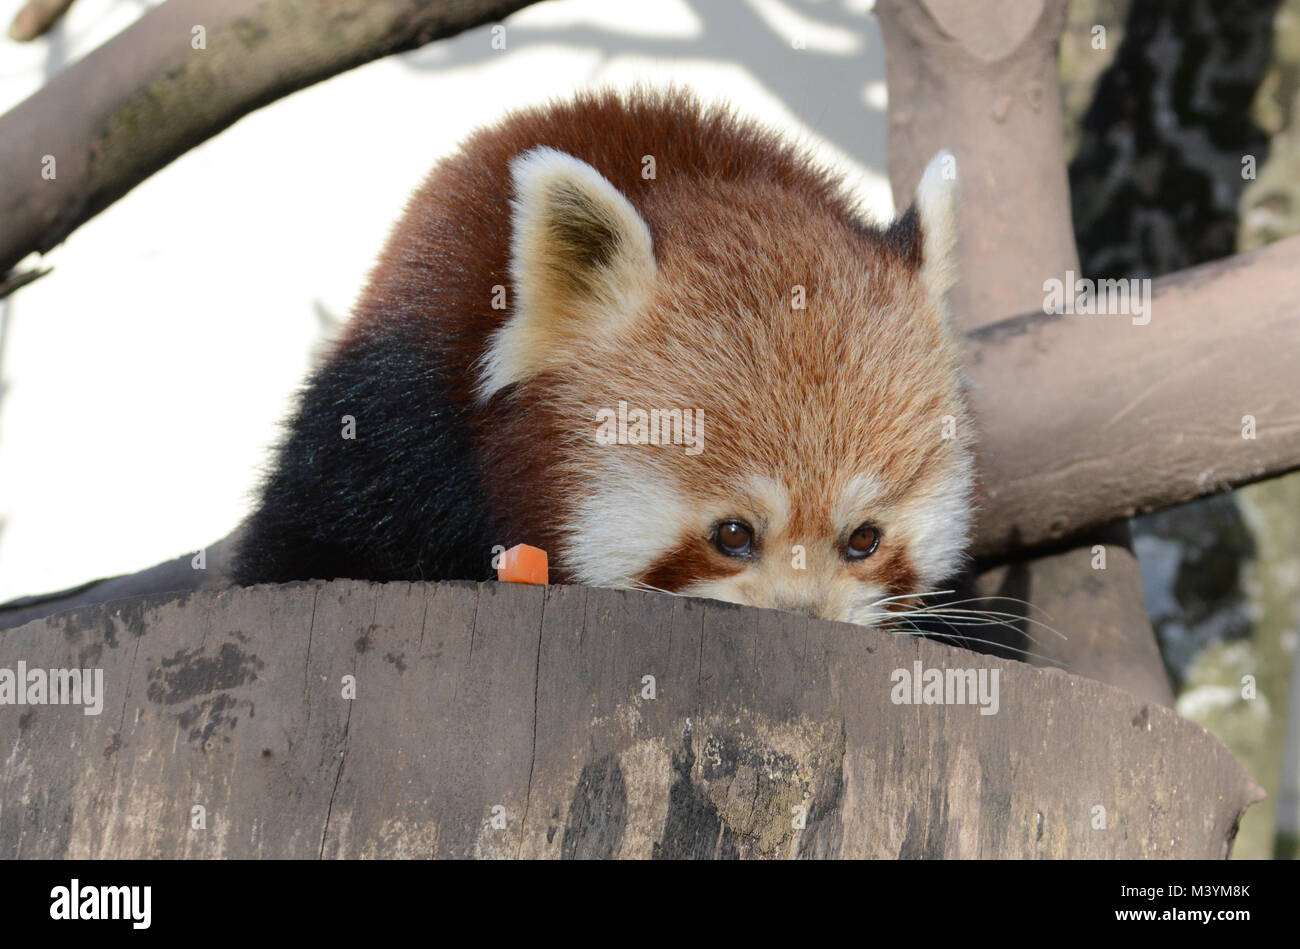 Paradise Park, Hayle, Cornwall. 13th Feb 2018.   Paradise Park is offering the opportunity for visitors to buy a “Red Panda Experience” where they come face to face with a Red Panda, be able to hand feed, stroke and even have a picture taken with these adorable pandas. The Pandas choose to come down to feed with the visitors,  with their welfare being of paramount importance. Seen here visitor Wendy Renshaw and the Pandas Keeper Sarah.  Credit: Simon Maycock/Alamy Live News Stock Photo